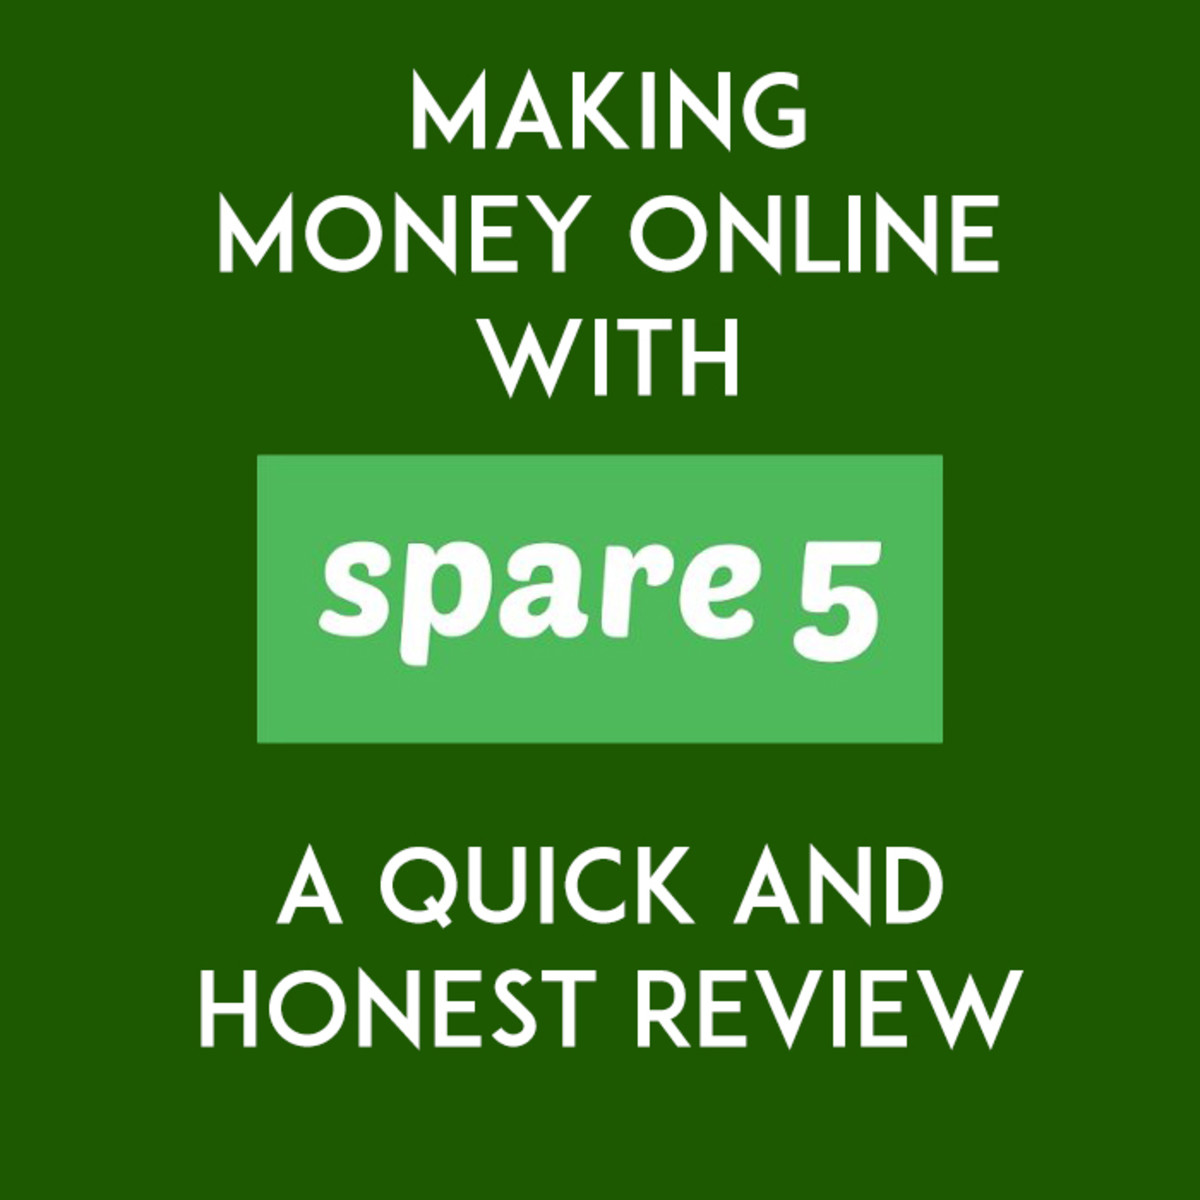 Making Money Online With Spare 5: A Quick, Honest Review